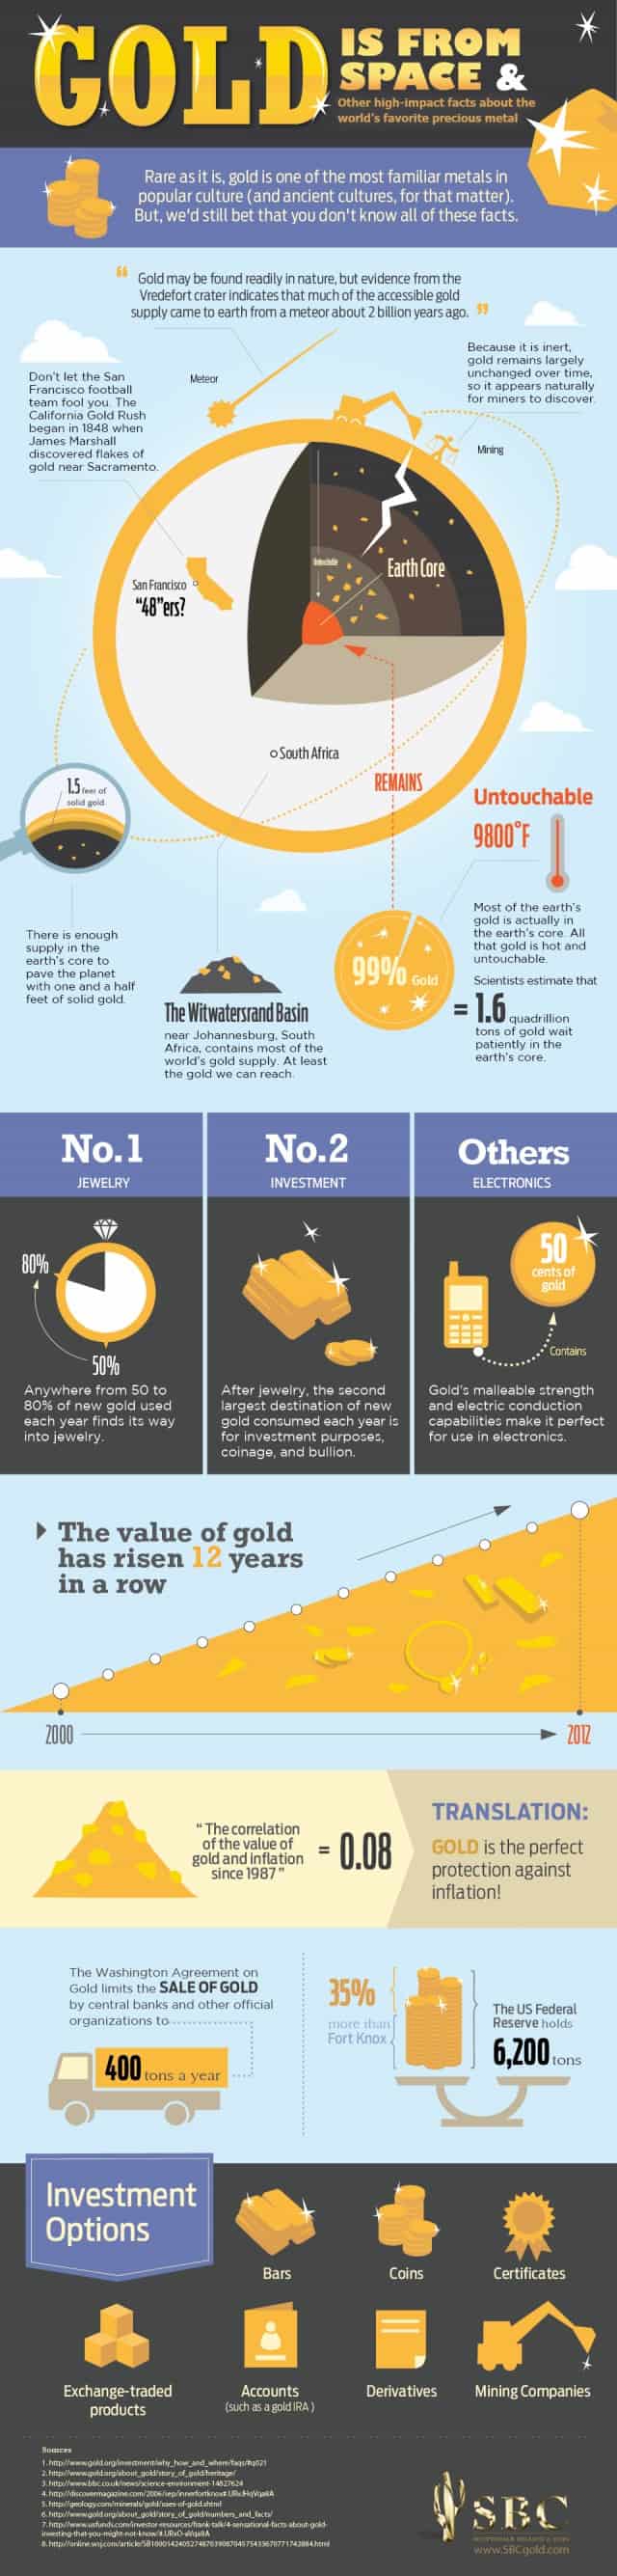 Gold is From Space & Other Facts